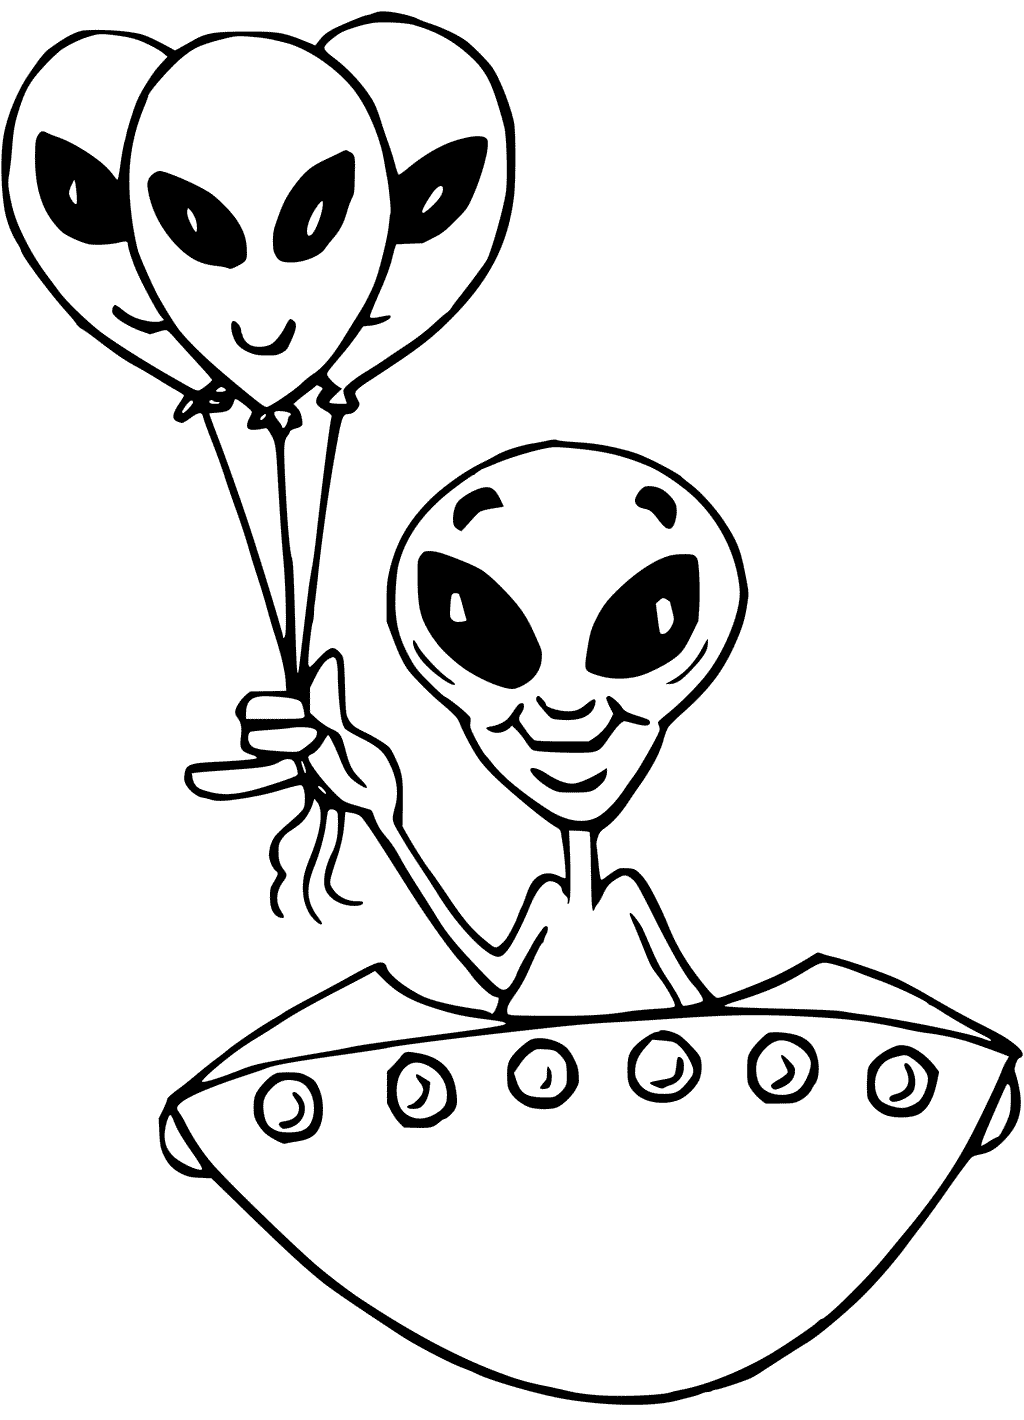 Funny Alien Coloring Page